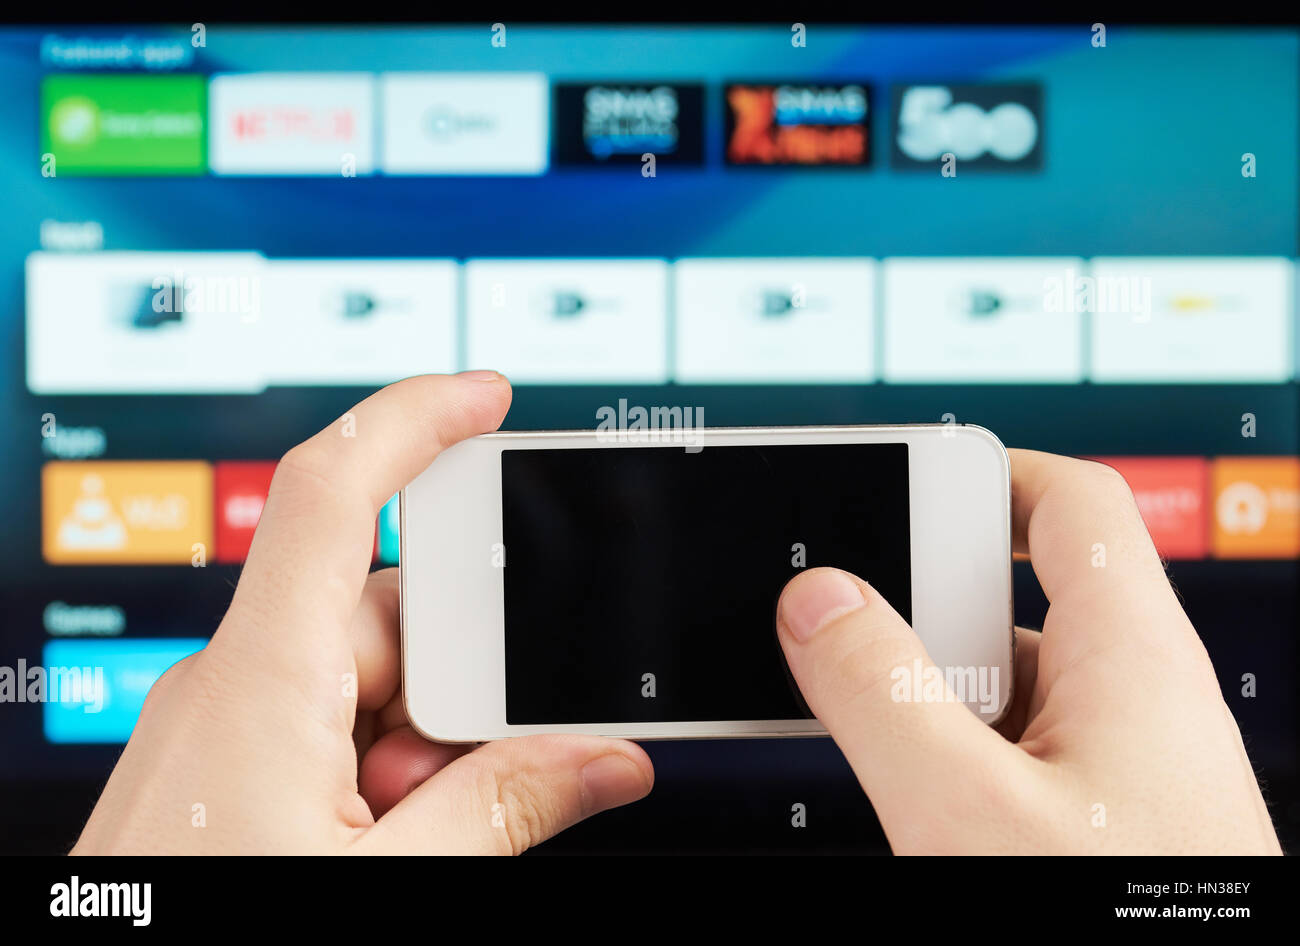 using smartphones as tv remote on blurred background Stock Photo